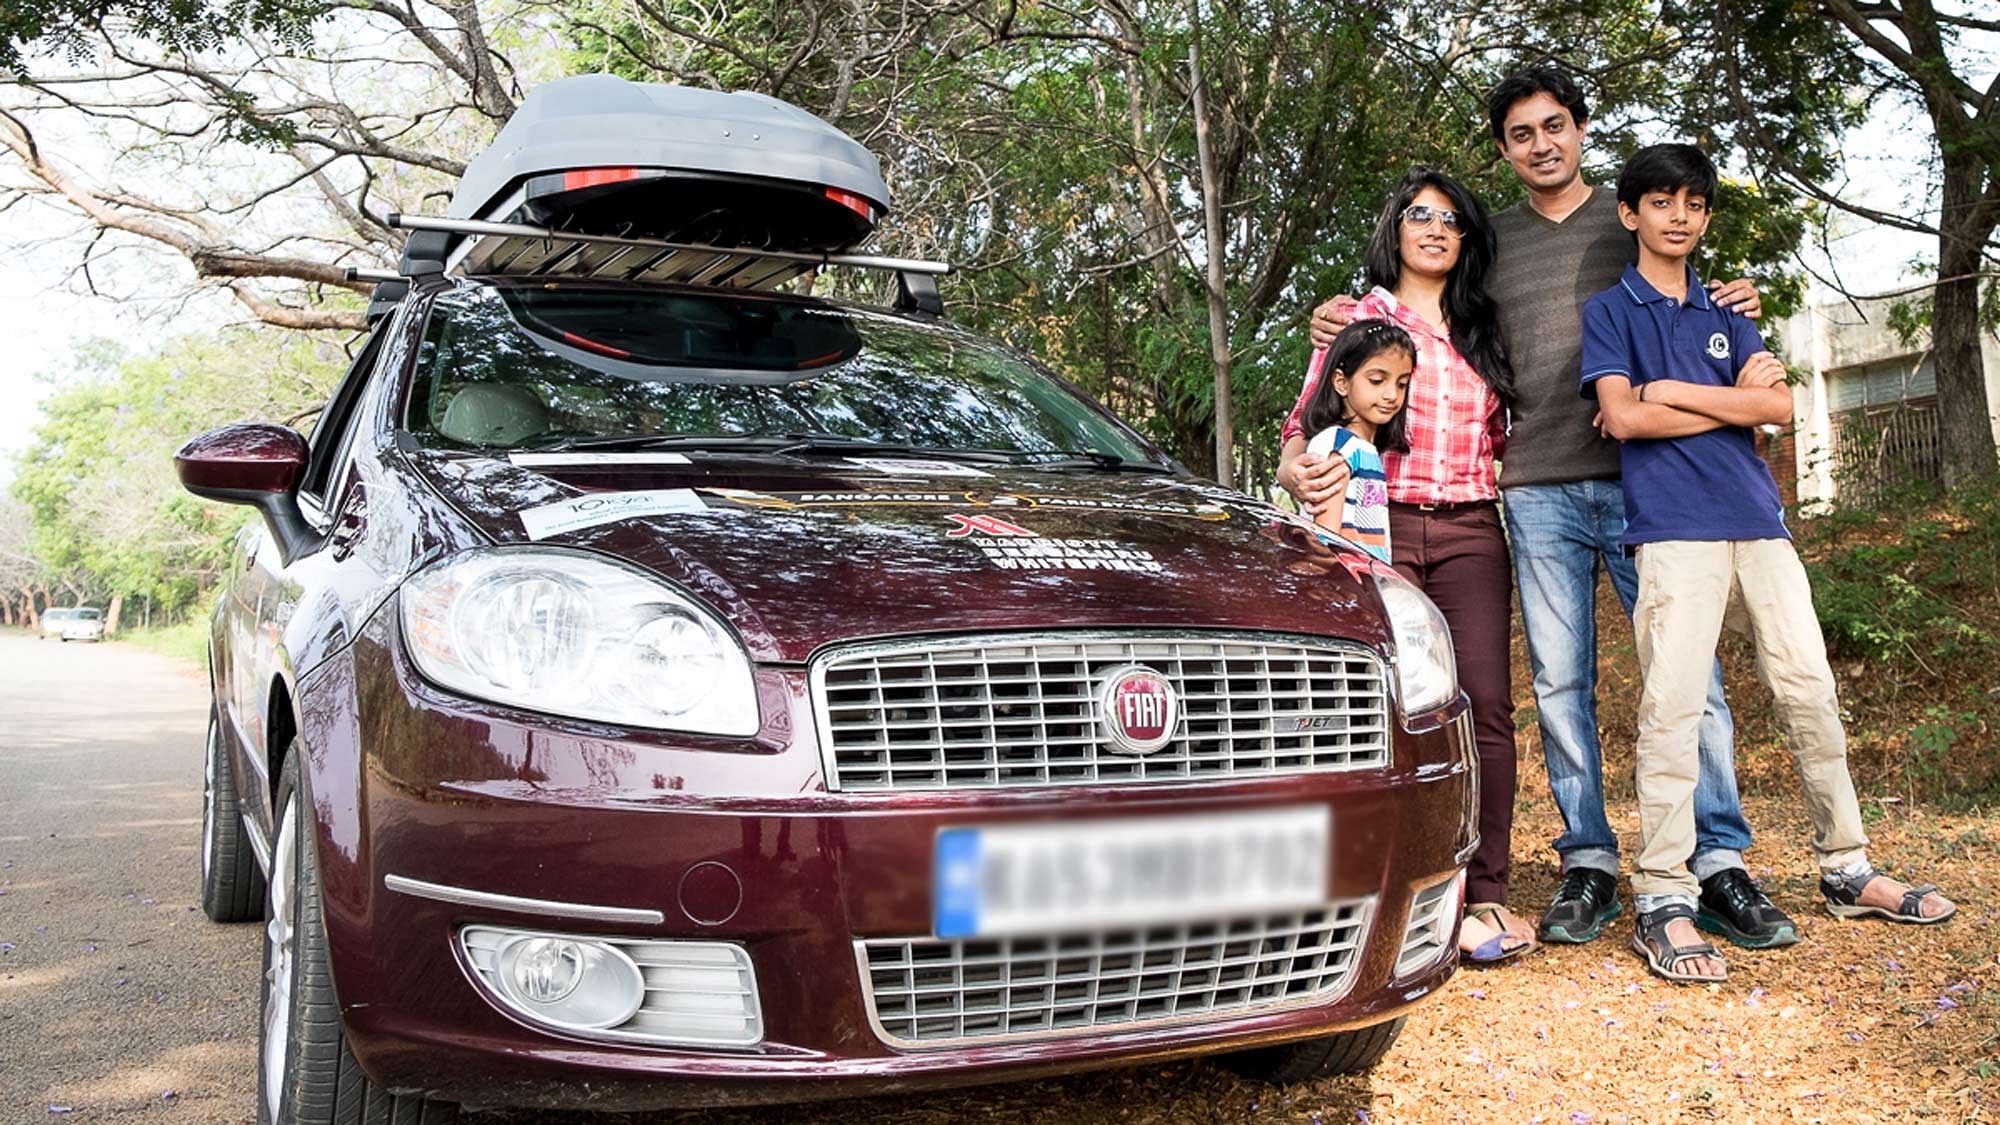 The Baid Family along with their Fiat Linea. (Photo: Fiat India)